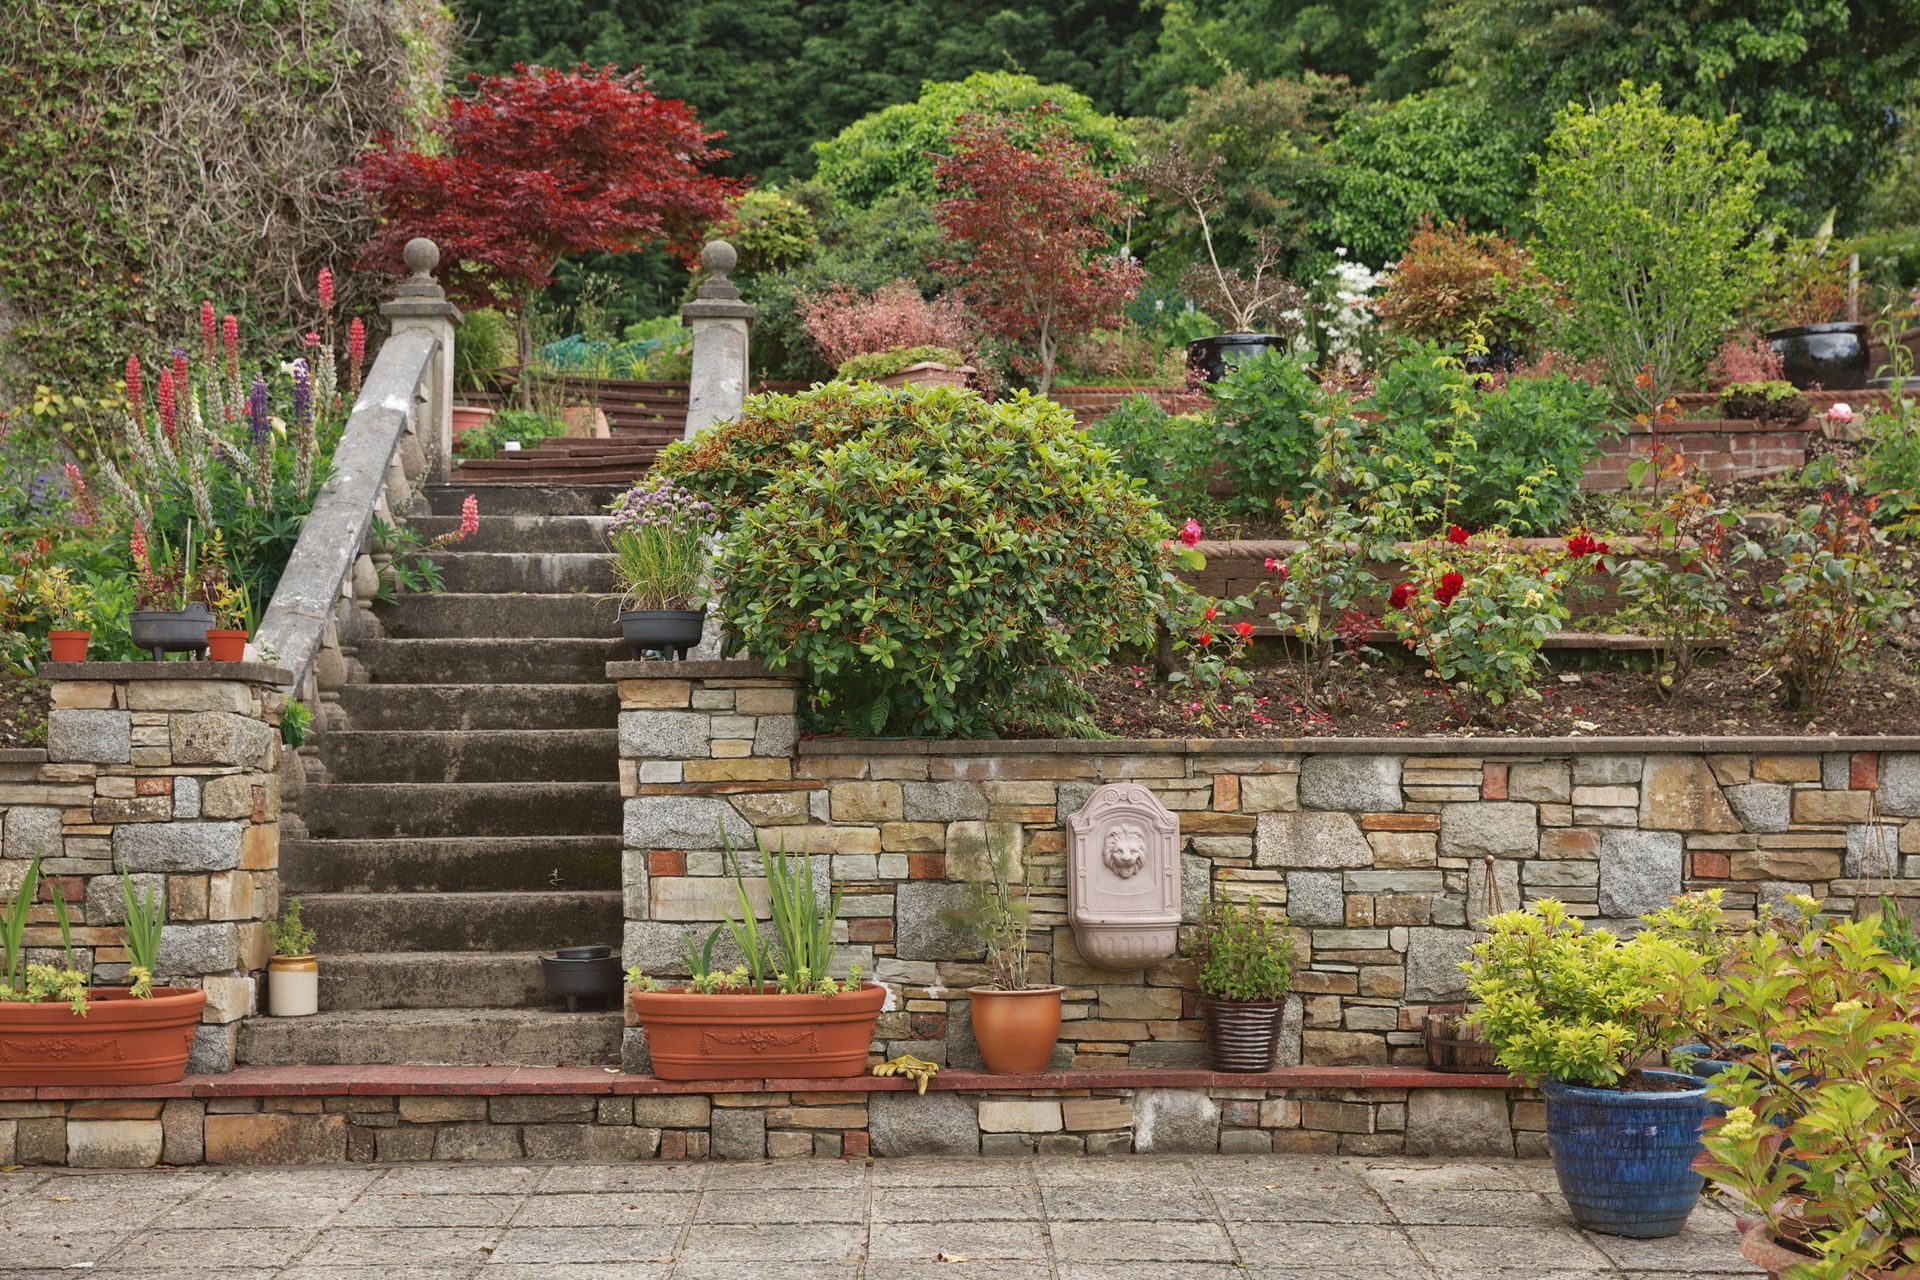 A Stone Wall with Stairs Leading up To a Garden - Kinston, NC - Garden Gator Landscape & Design